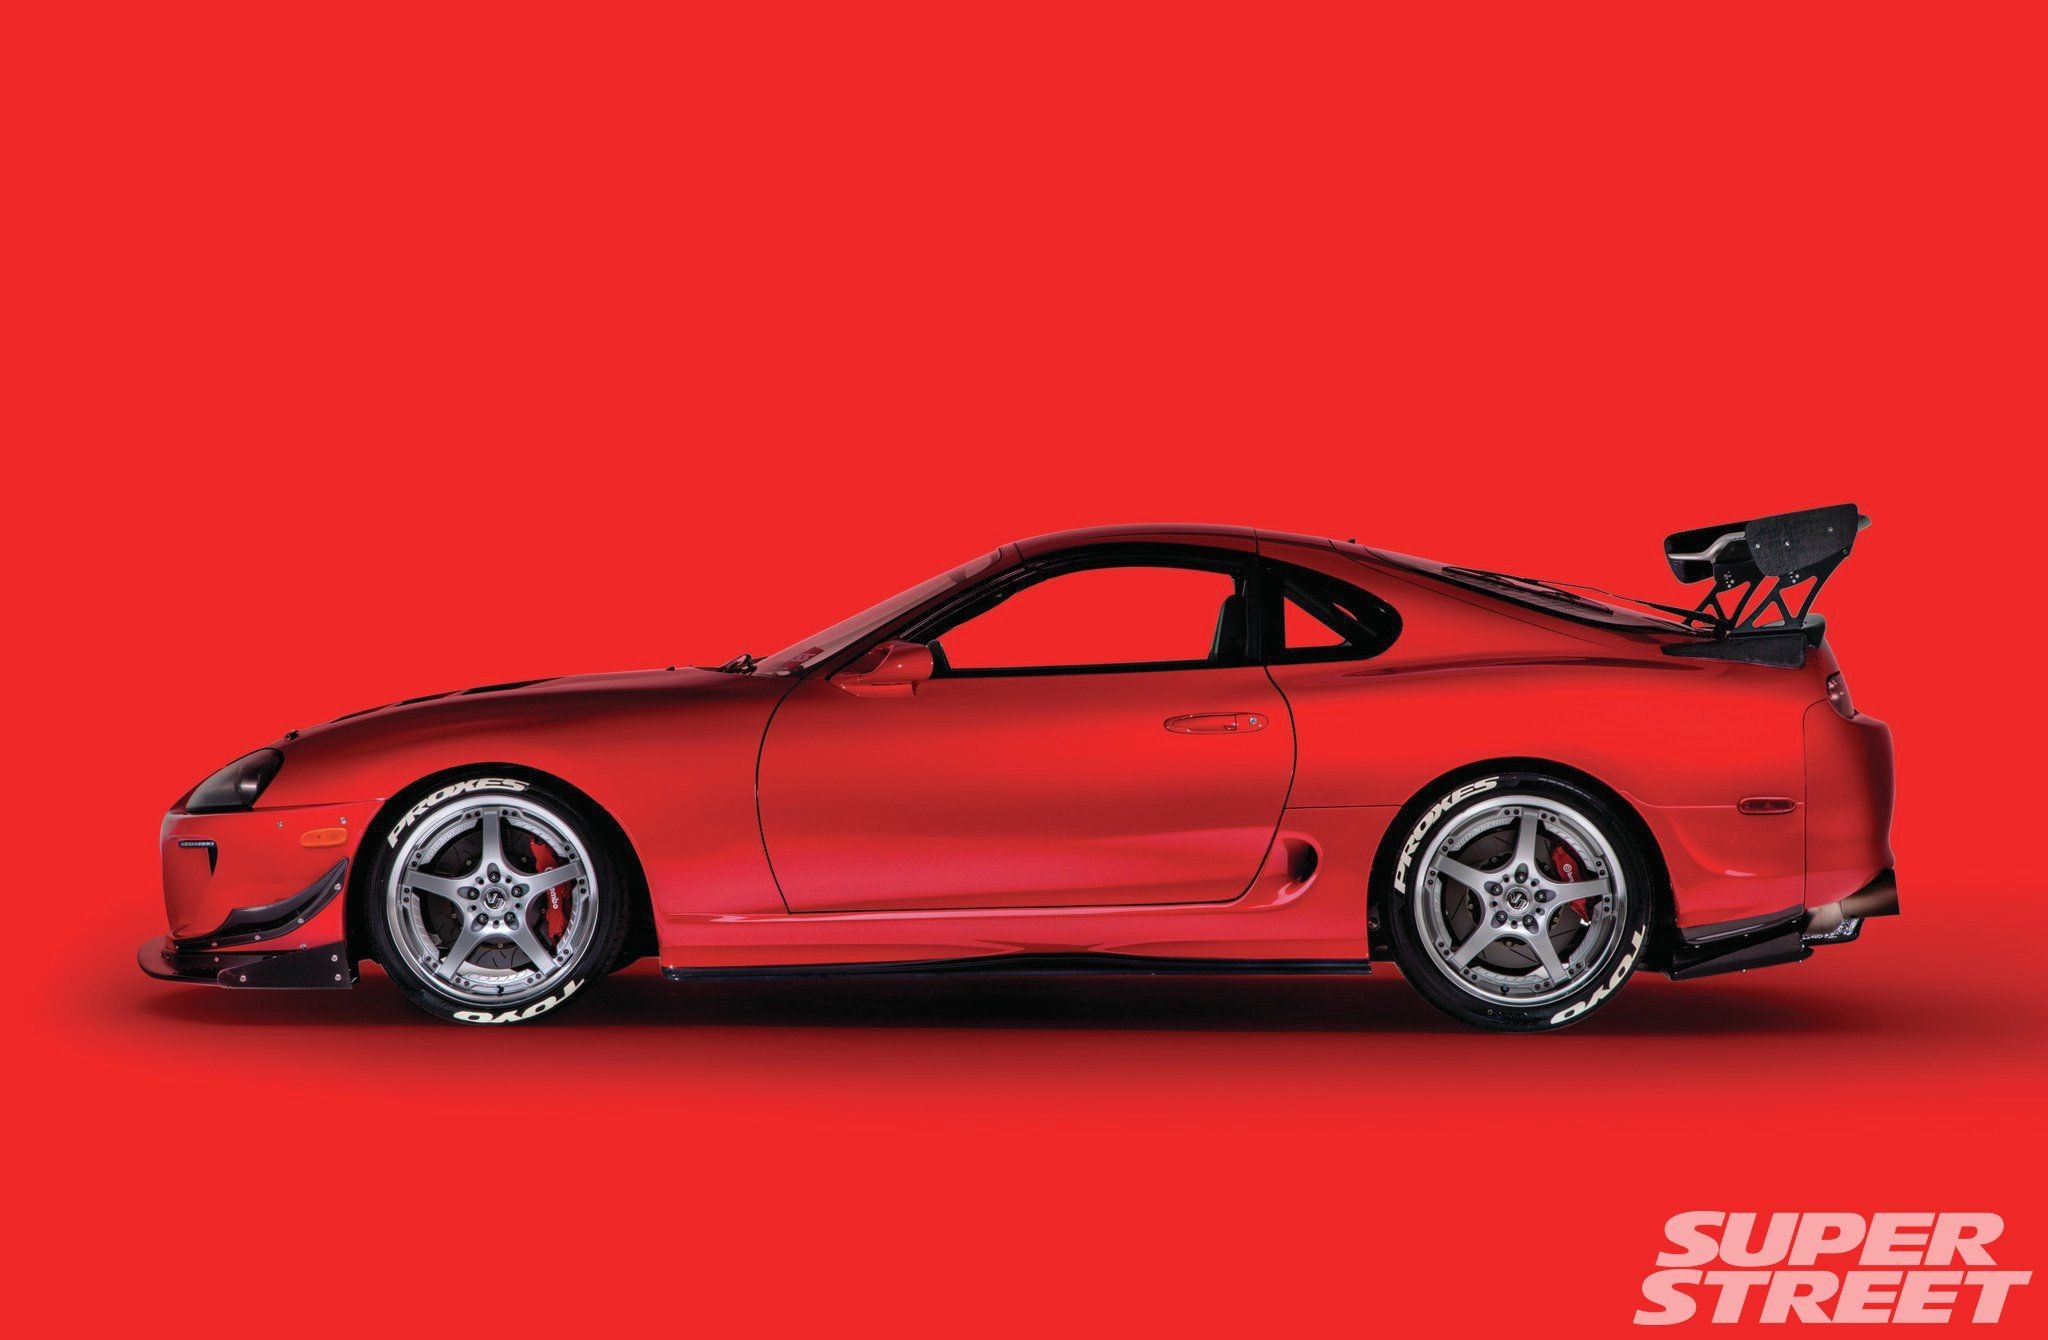 General 2048x1340 car red background red Toyota Supra A80 Toyota Supra Toyota simple background red cars vehicle Japanese cars coupe car spoiler